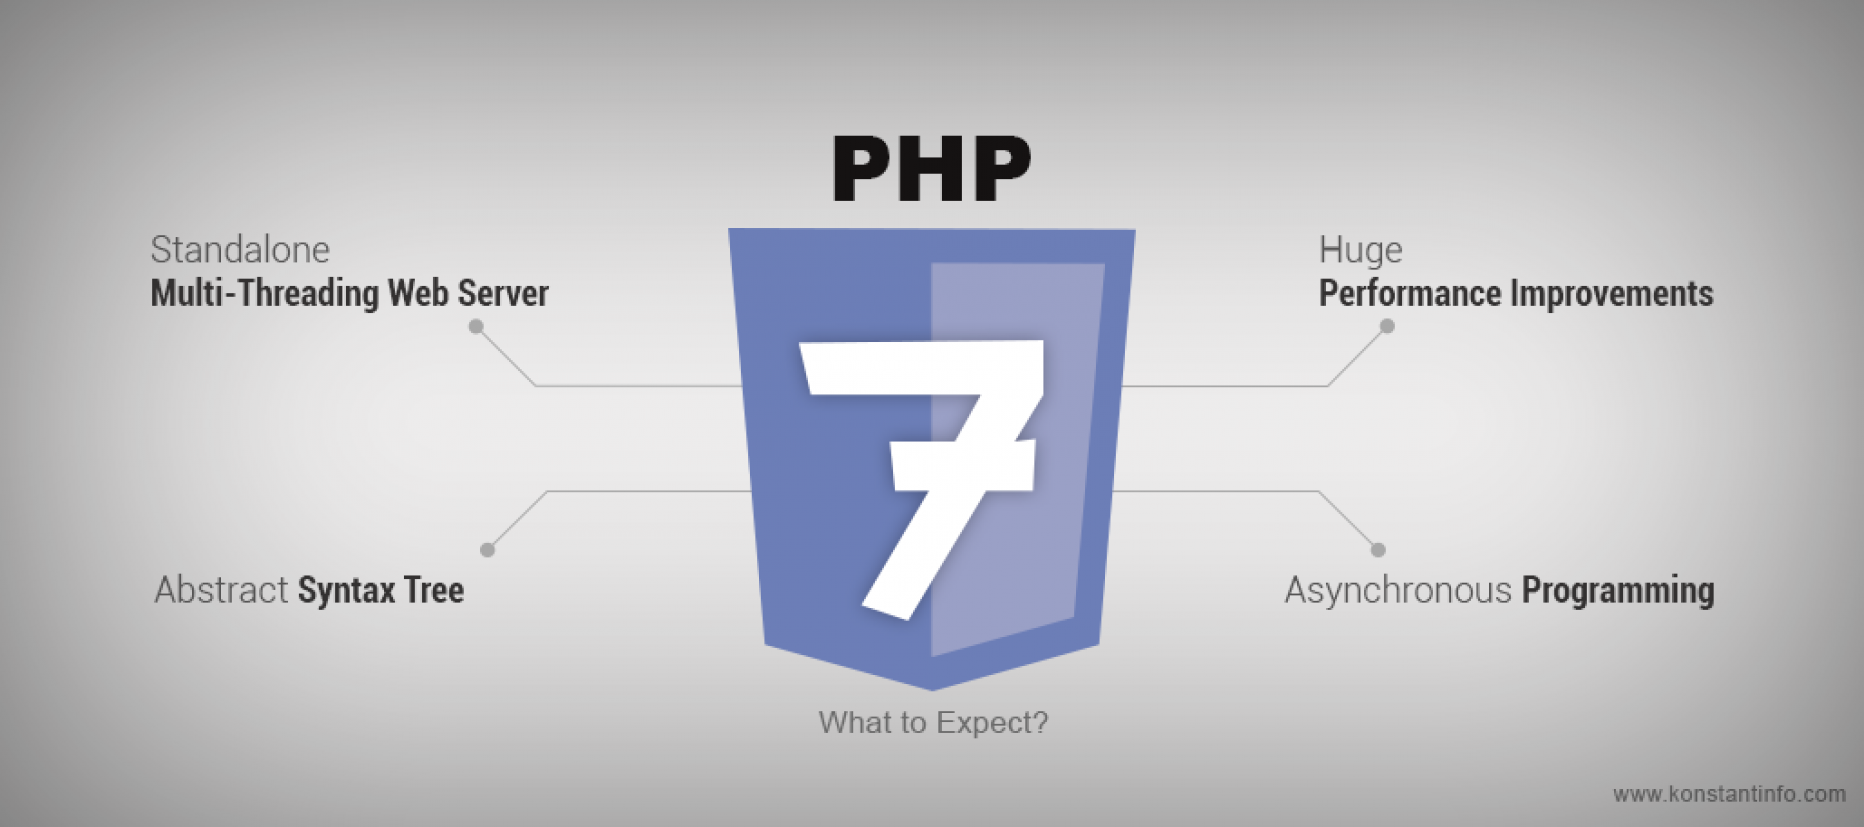 Php import. Php. Php 7. Php картинка. Значок php.